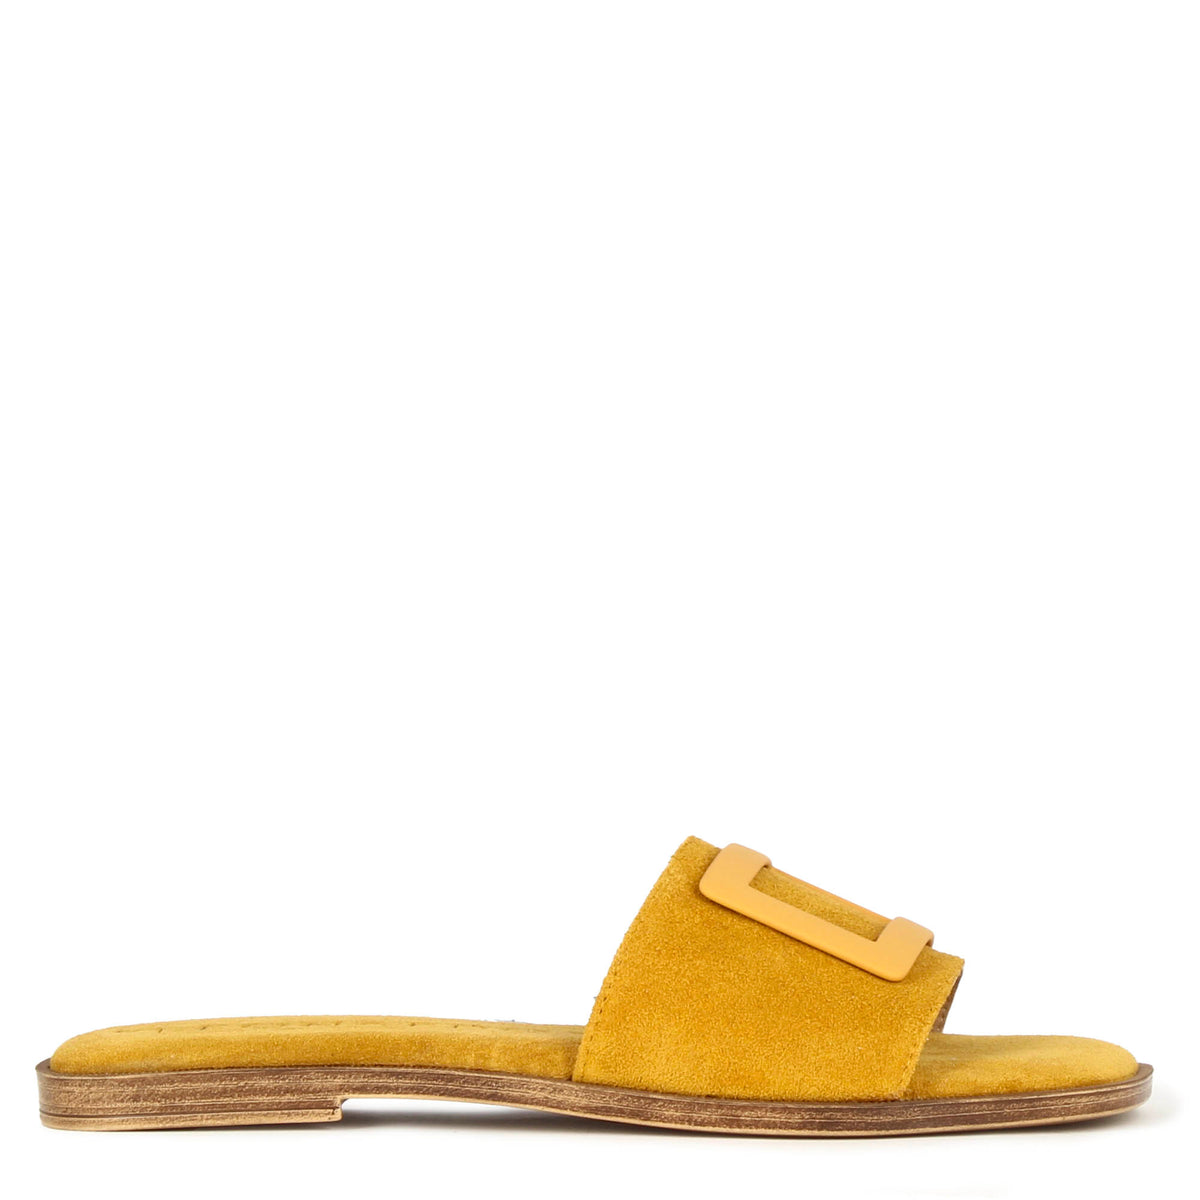 Women's suede slippers with yellow band